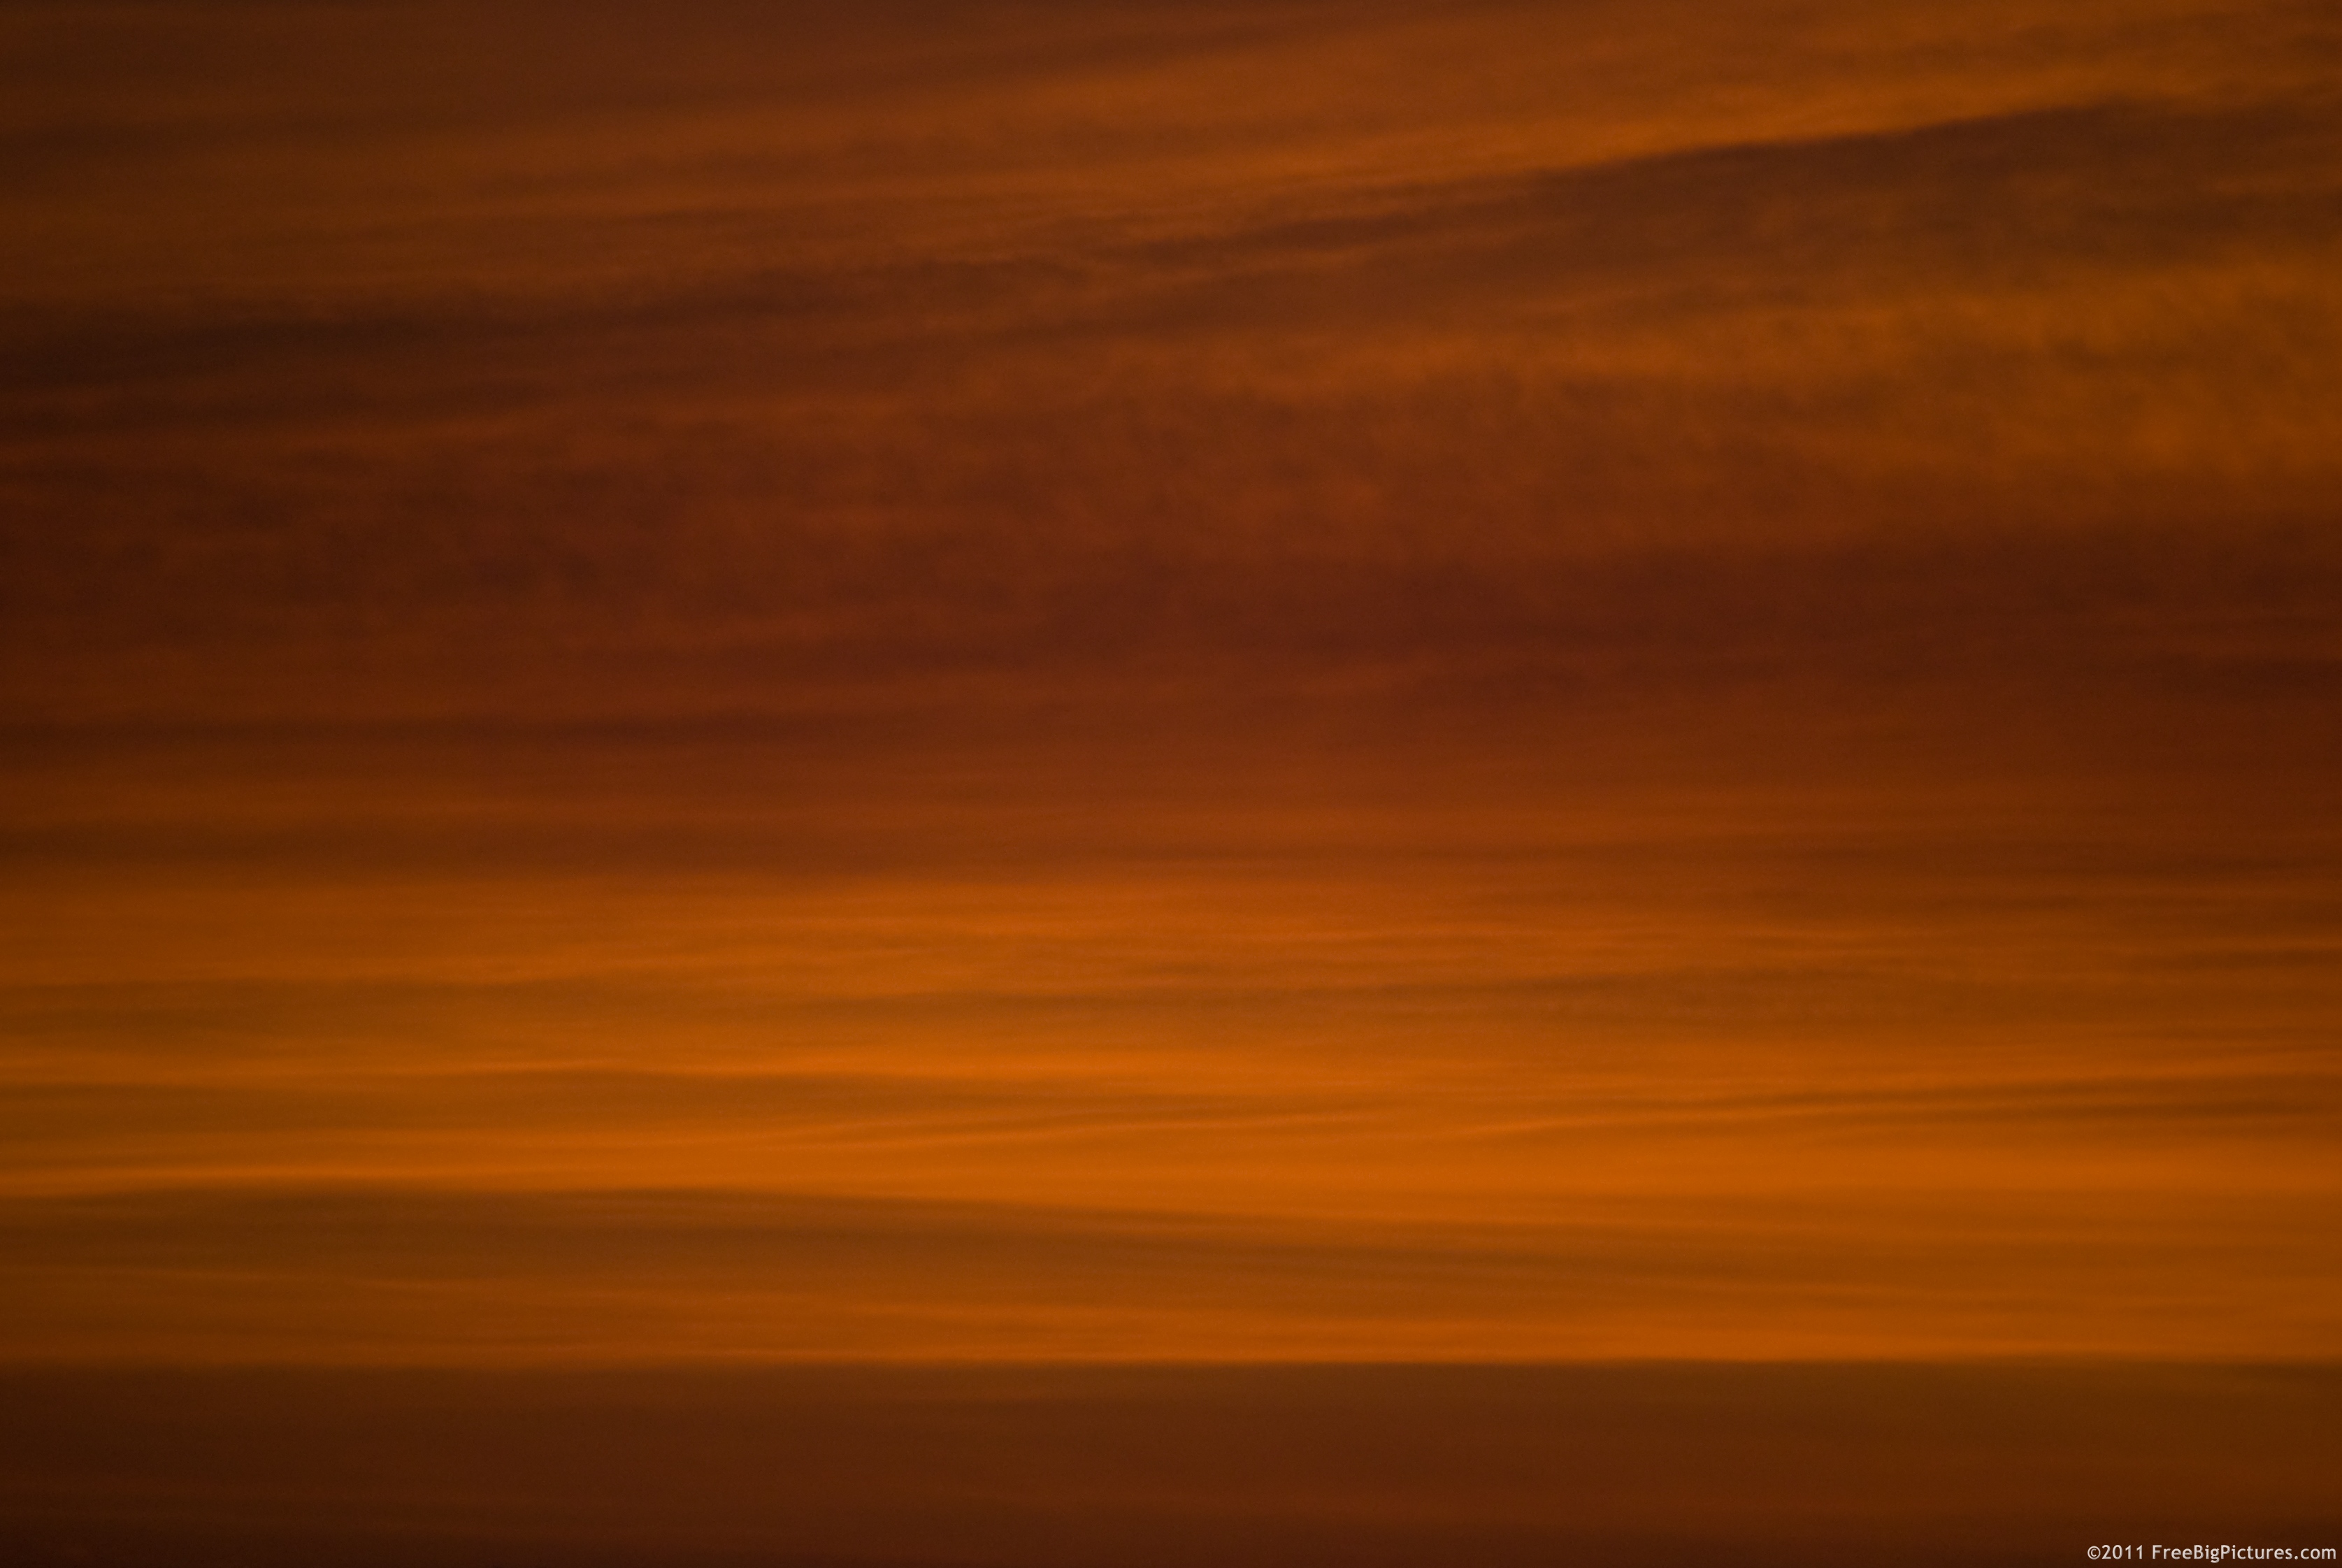 Sunset with red layers of clouds, in a dusty and smoky athmosphere